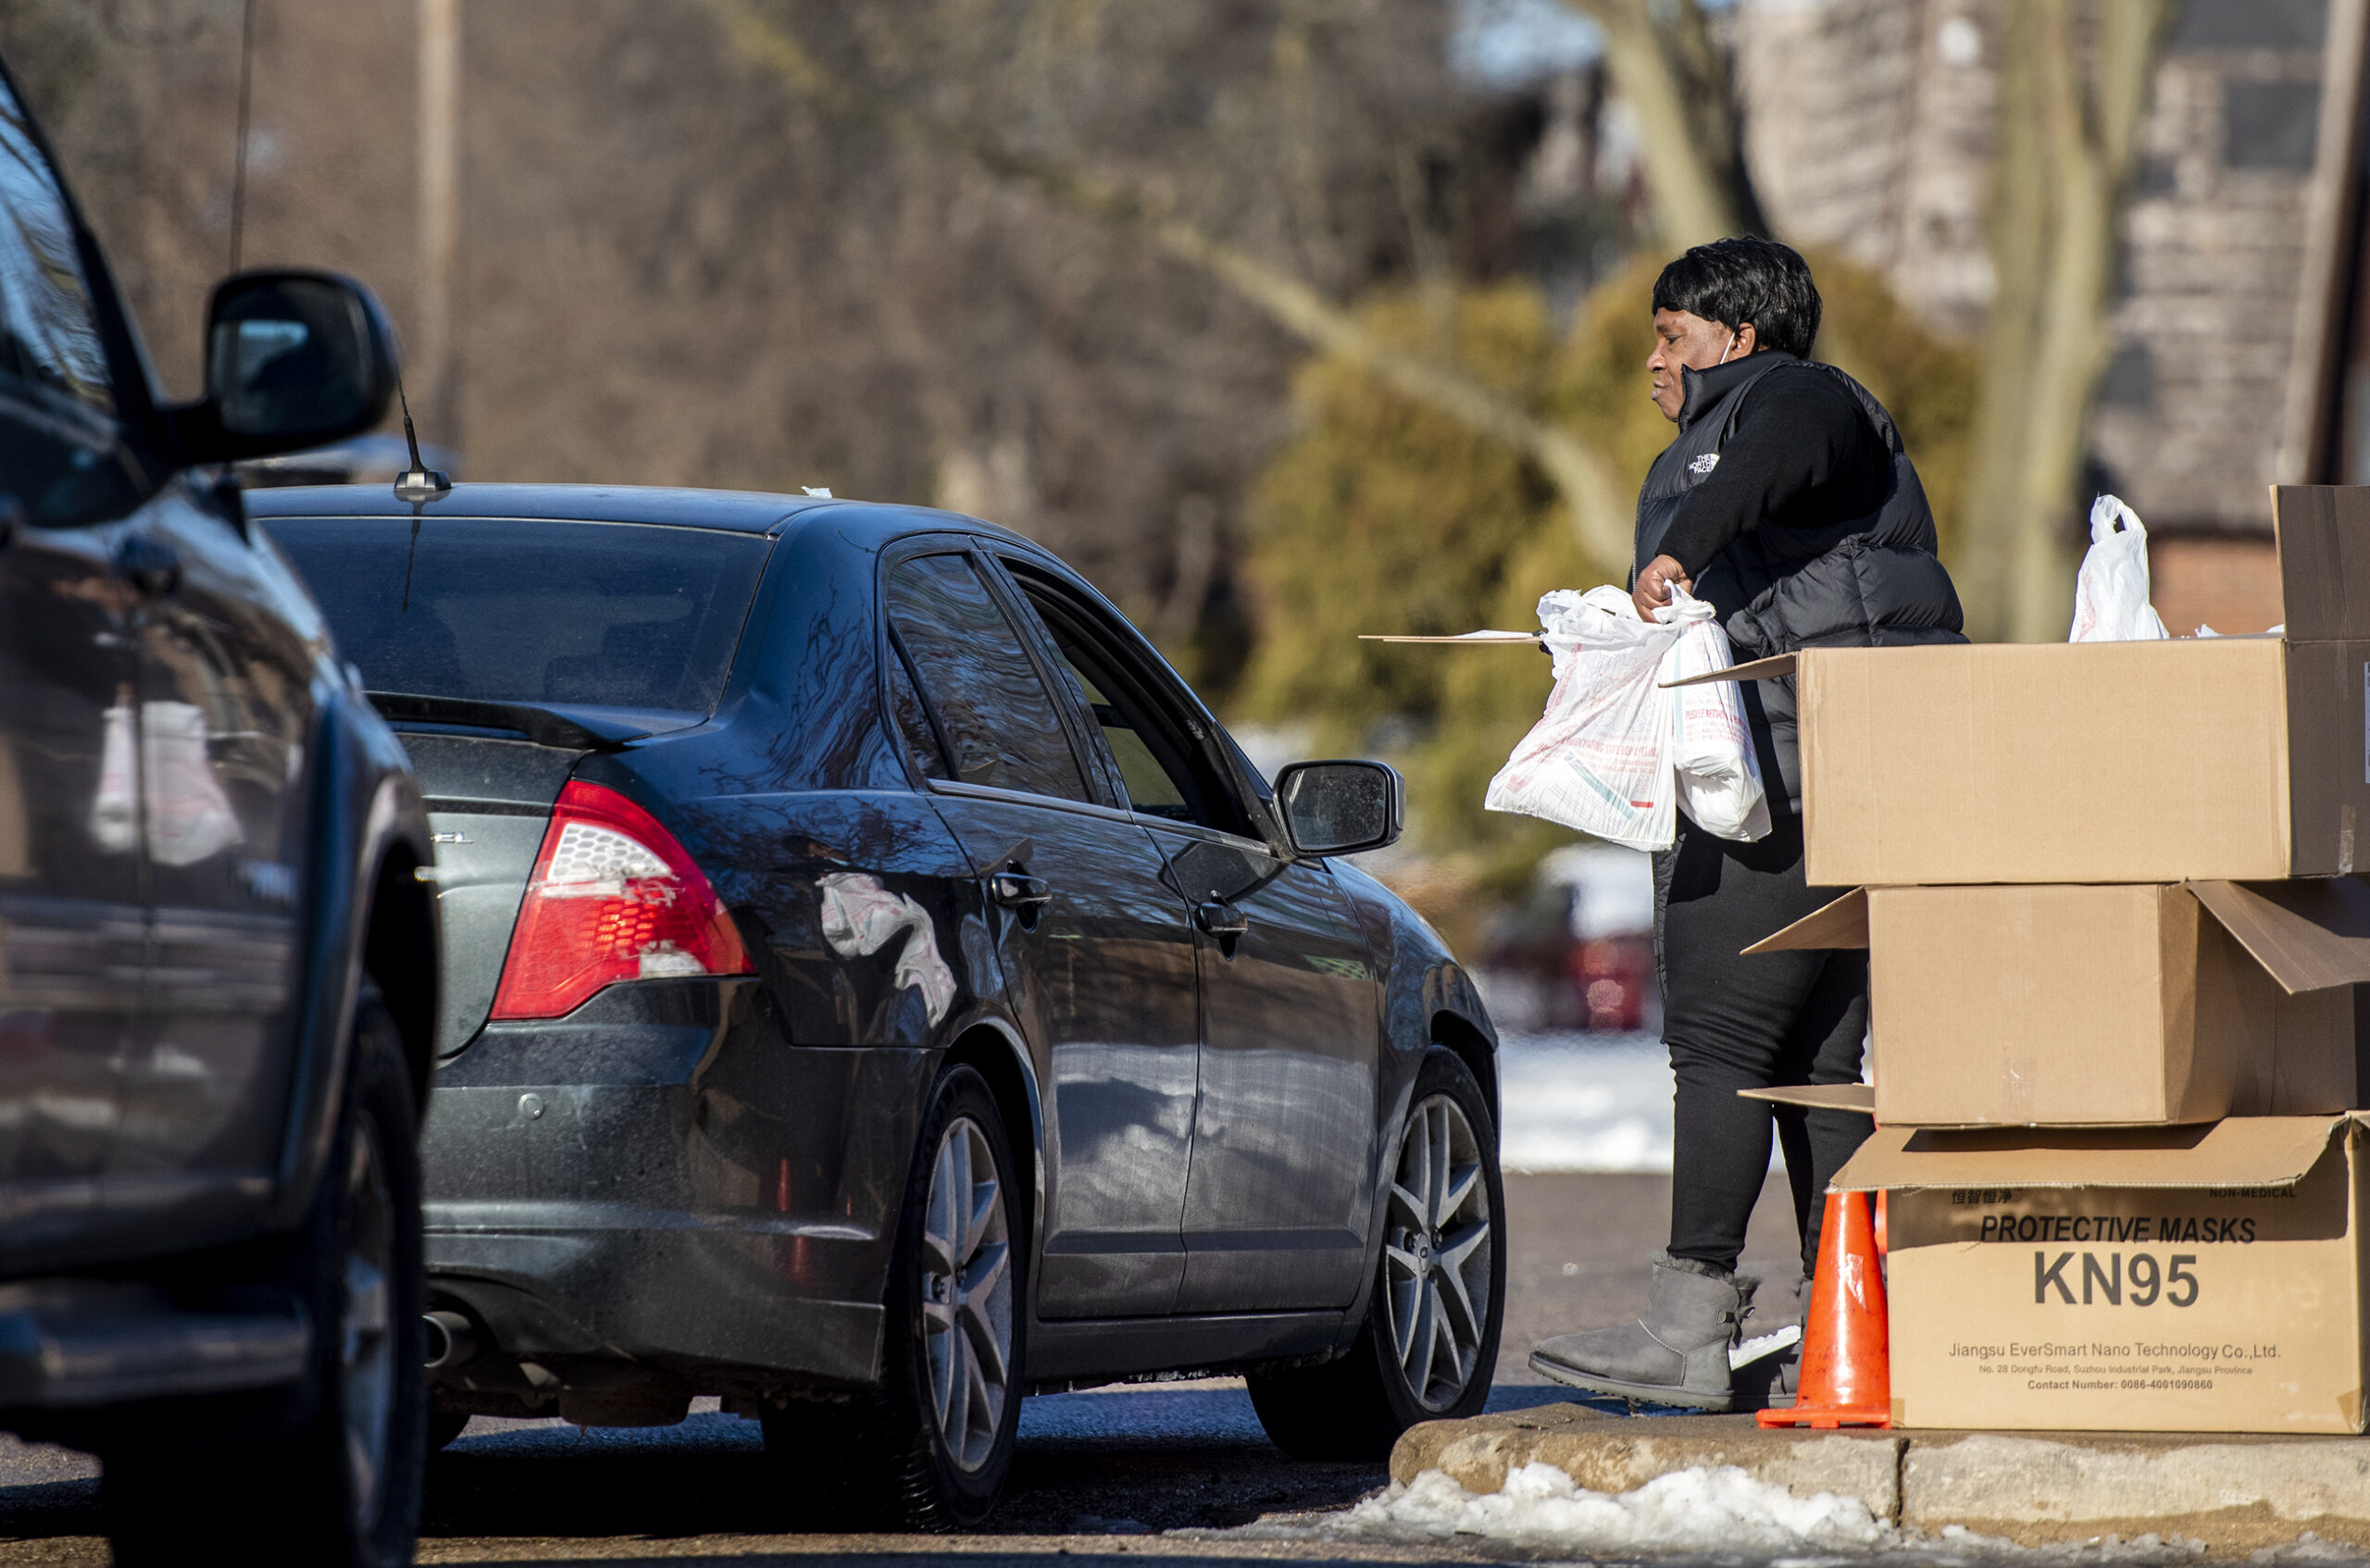 A woman carries white plastic bags of supplies to a car in a drive thru line.